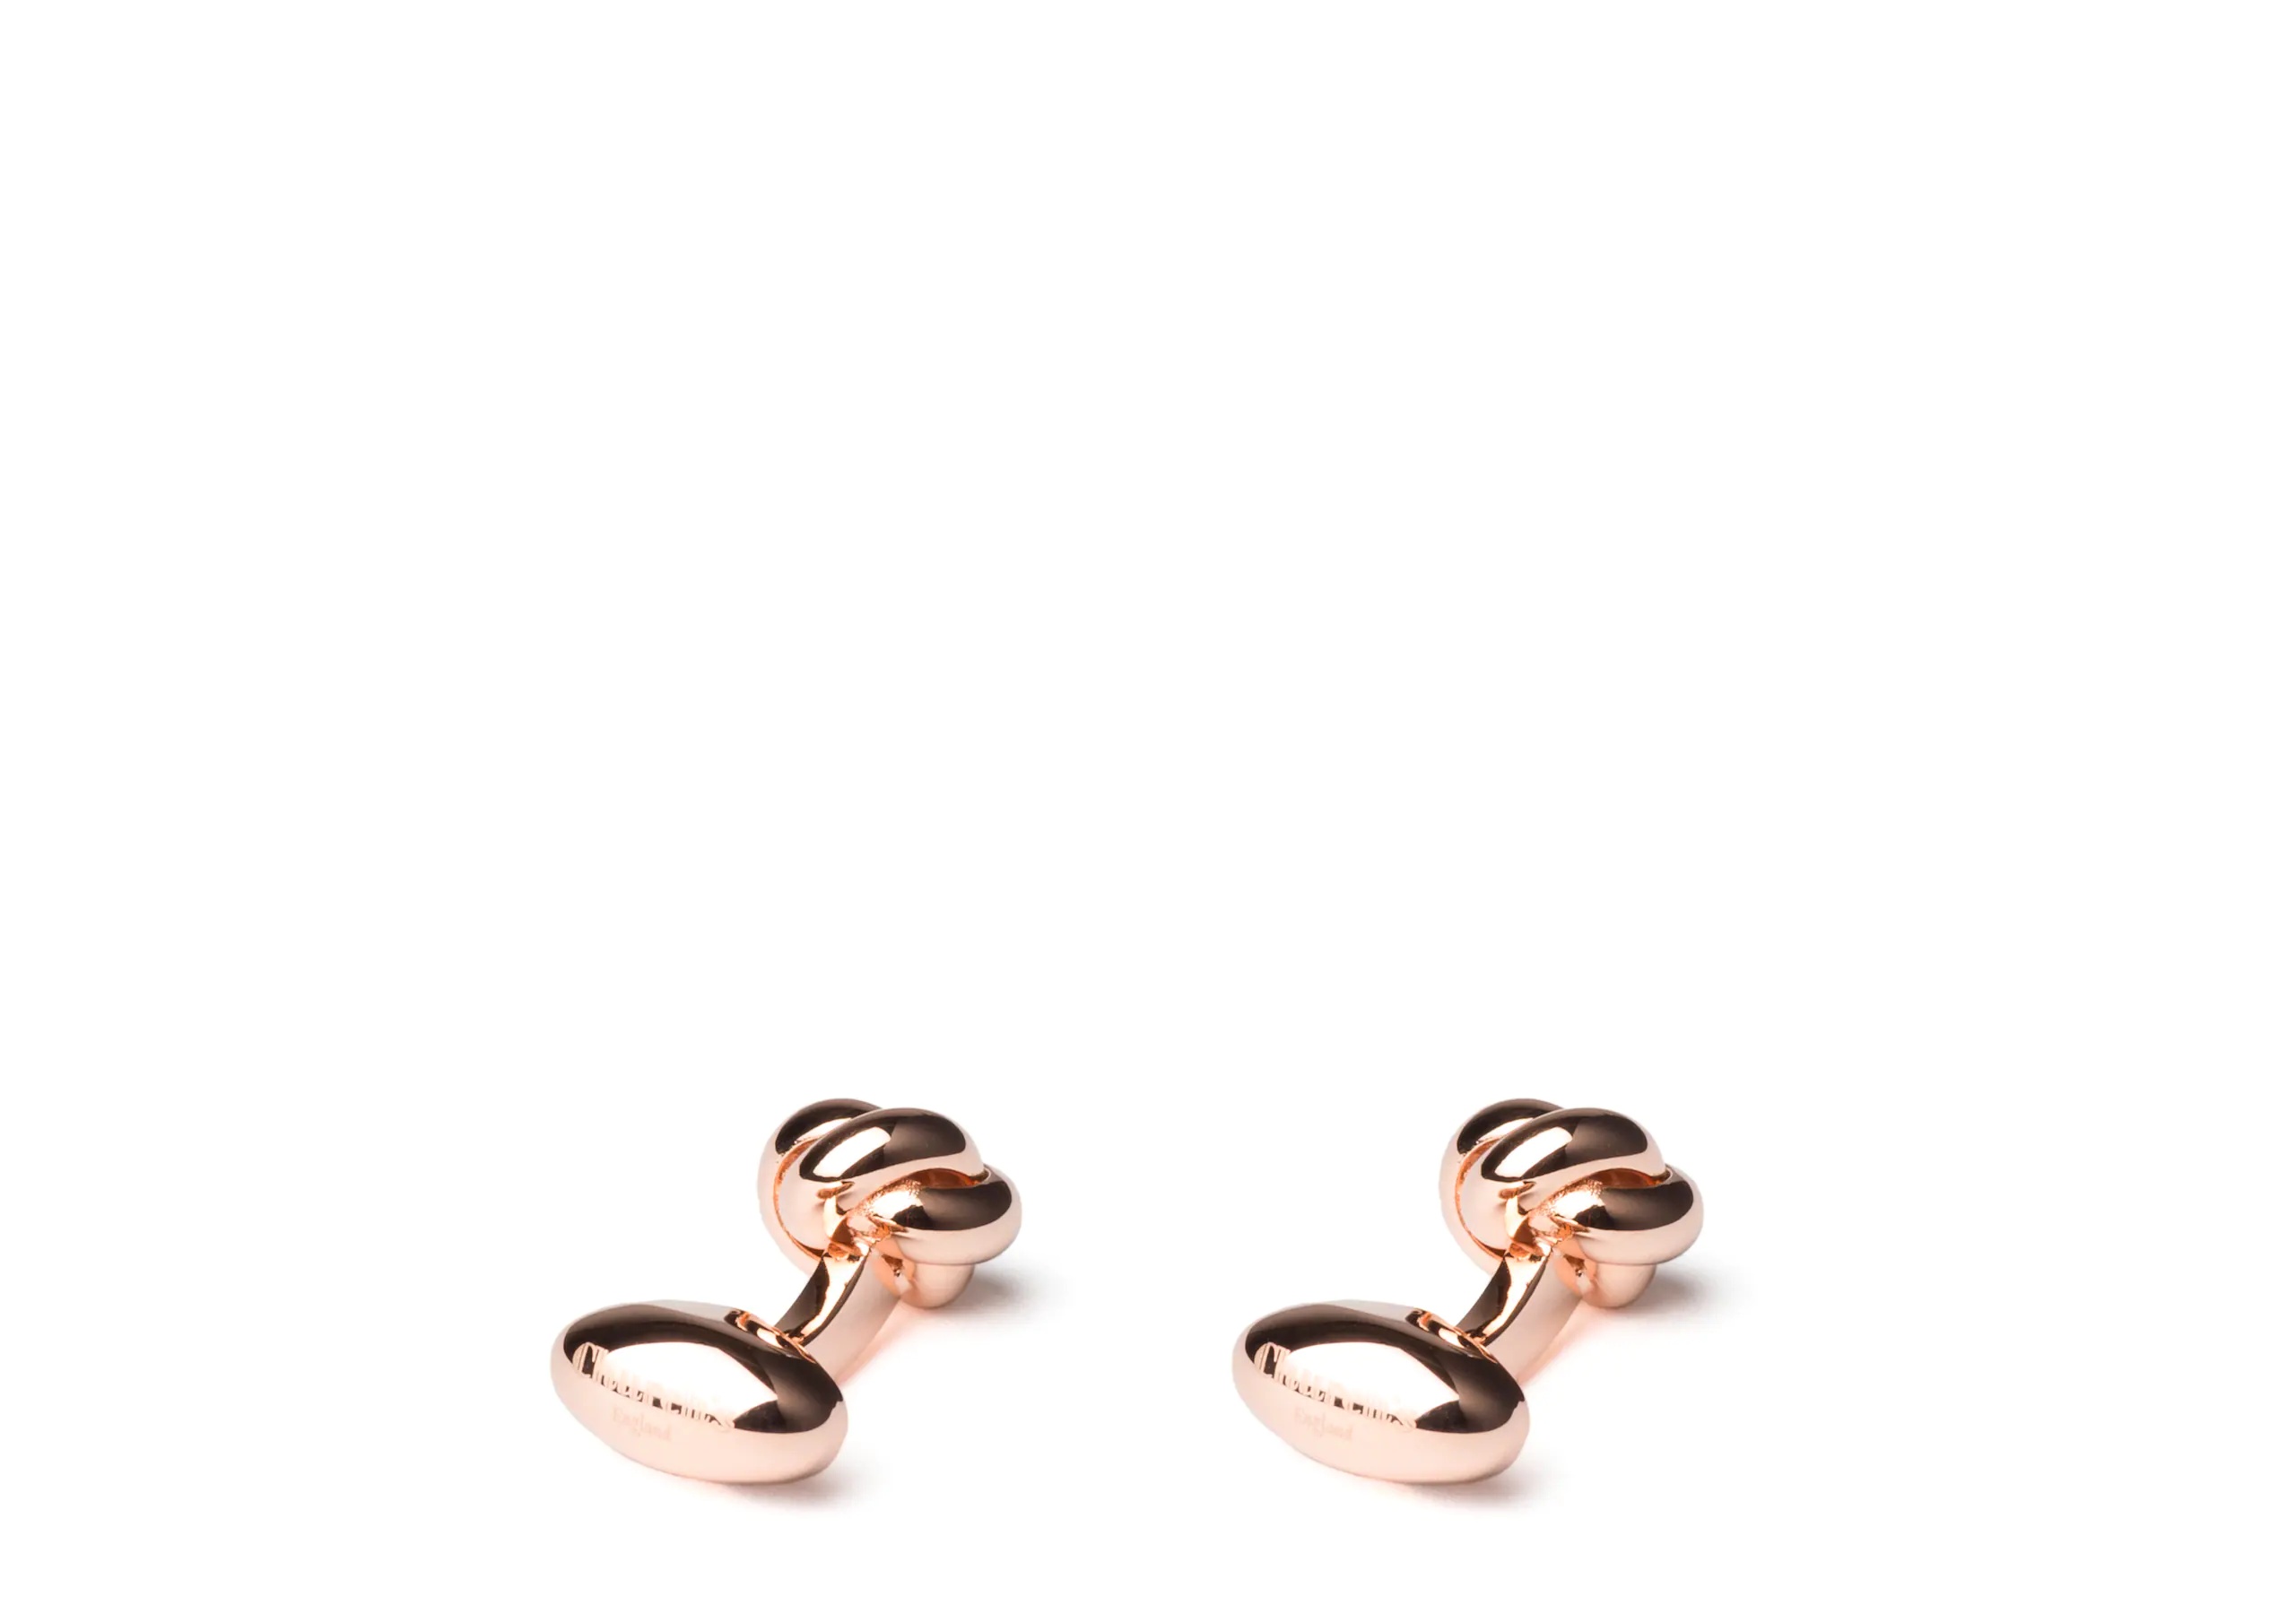 Knotted cufflink
Rhodium Plated Knot Rose gold - 2